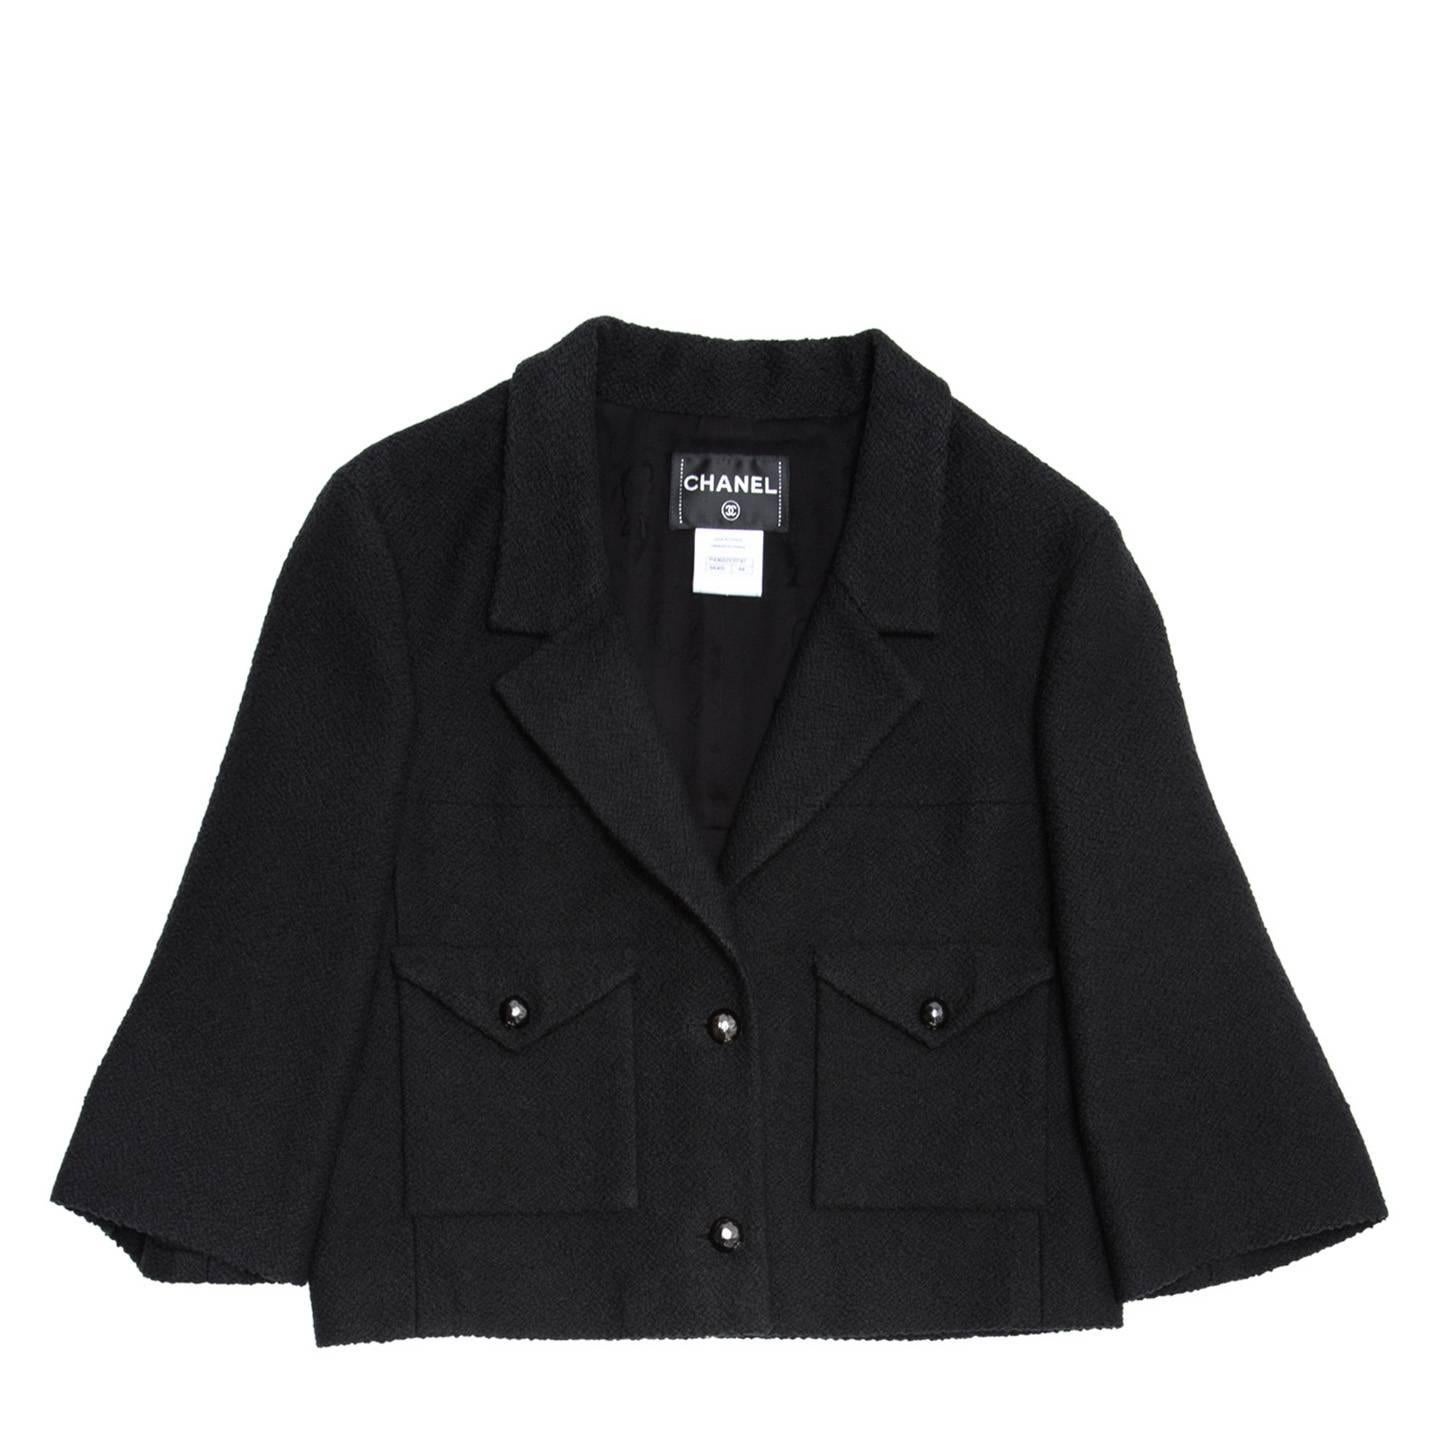 Cotton and silk boucle black cropped jacket with straight 3/4 sleeves. The jacket fastens with 2 dome shape black wrought metal buttons with a little Chanel logo, the V-neck is quite deep with a medium size lapel. Two square patch pocket with